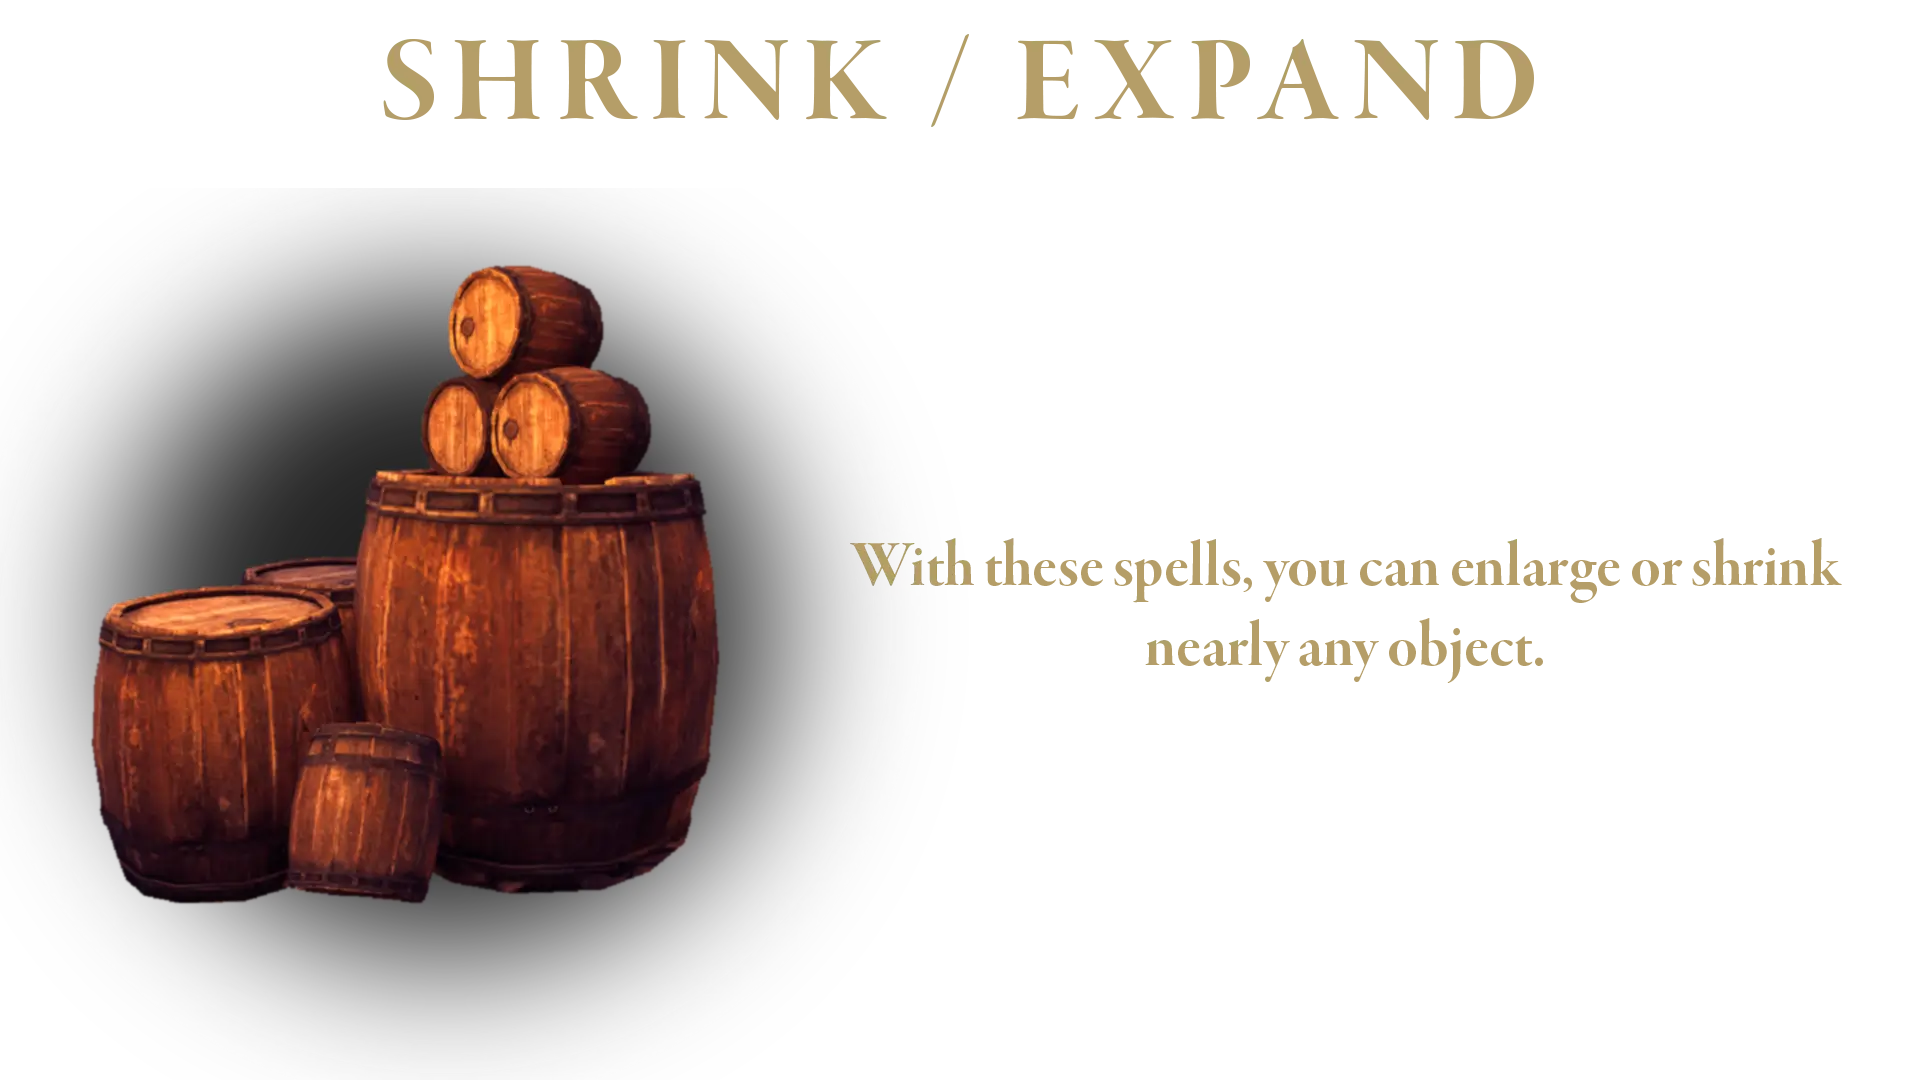 Shrink and expand spell description